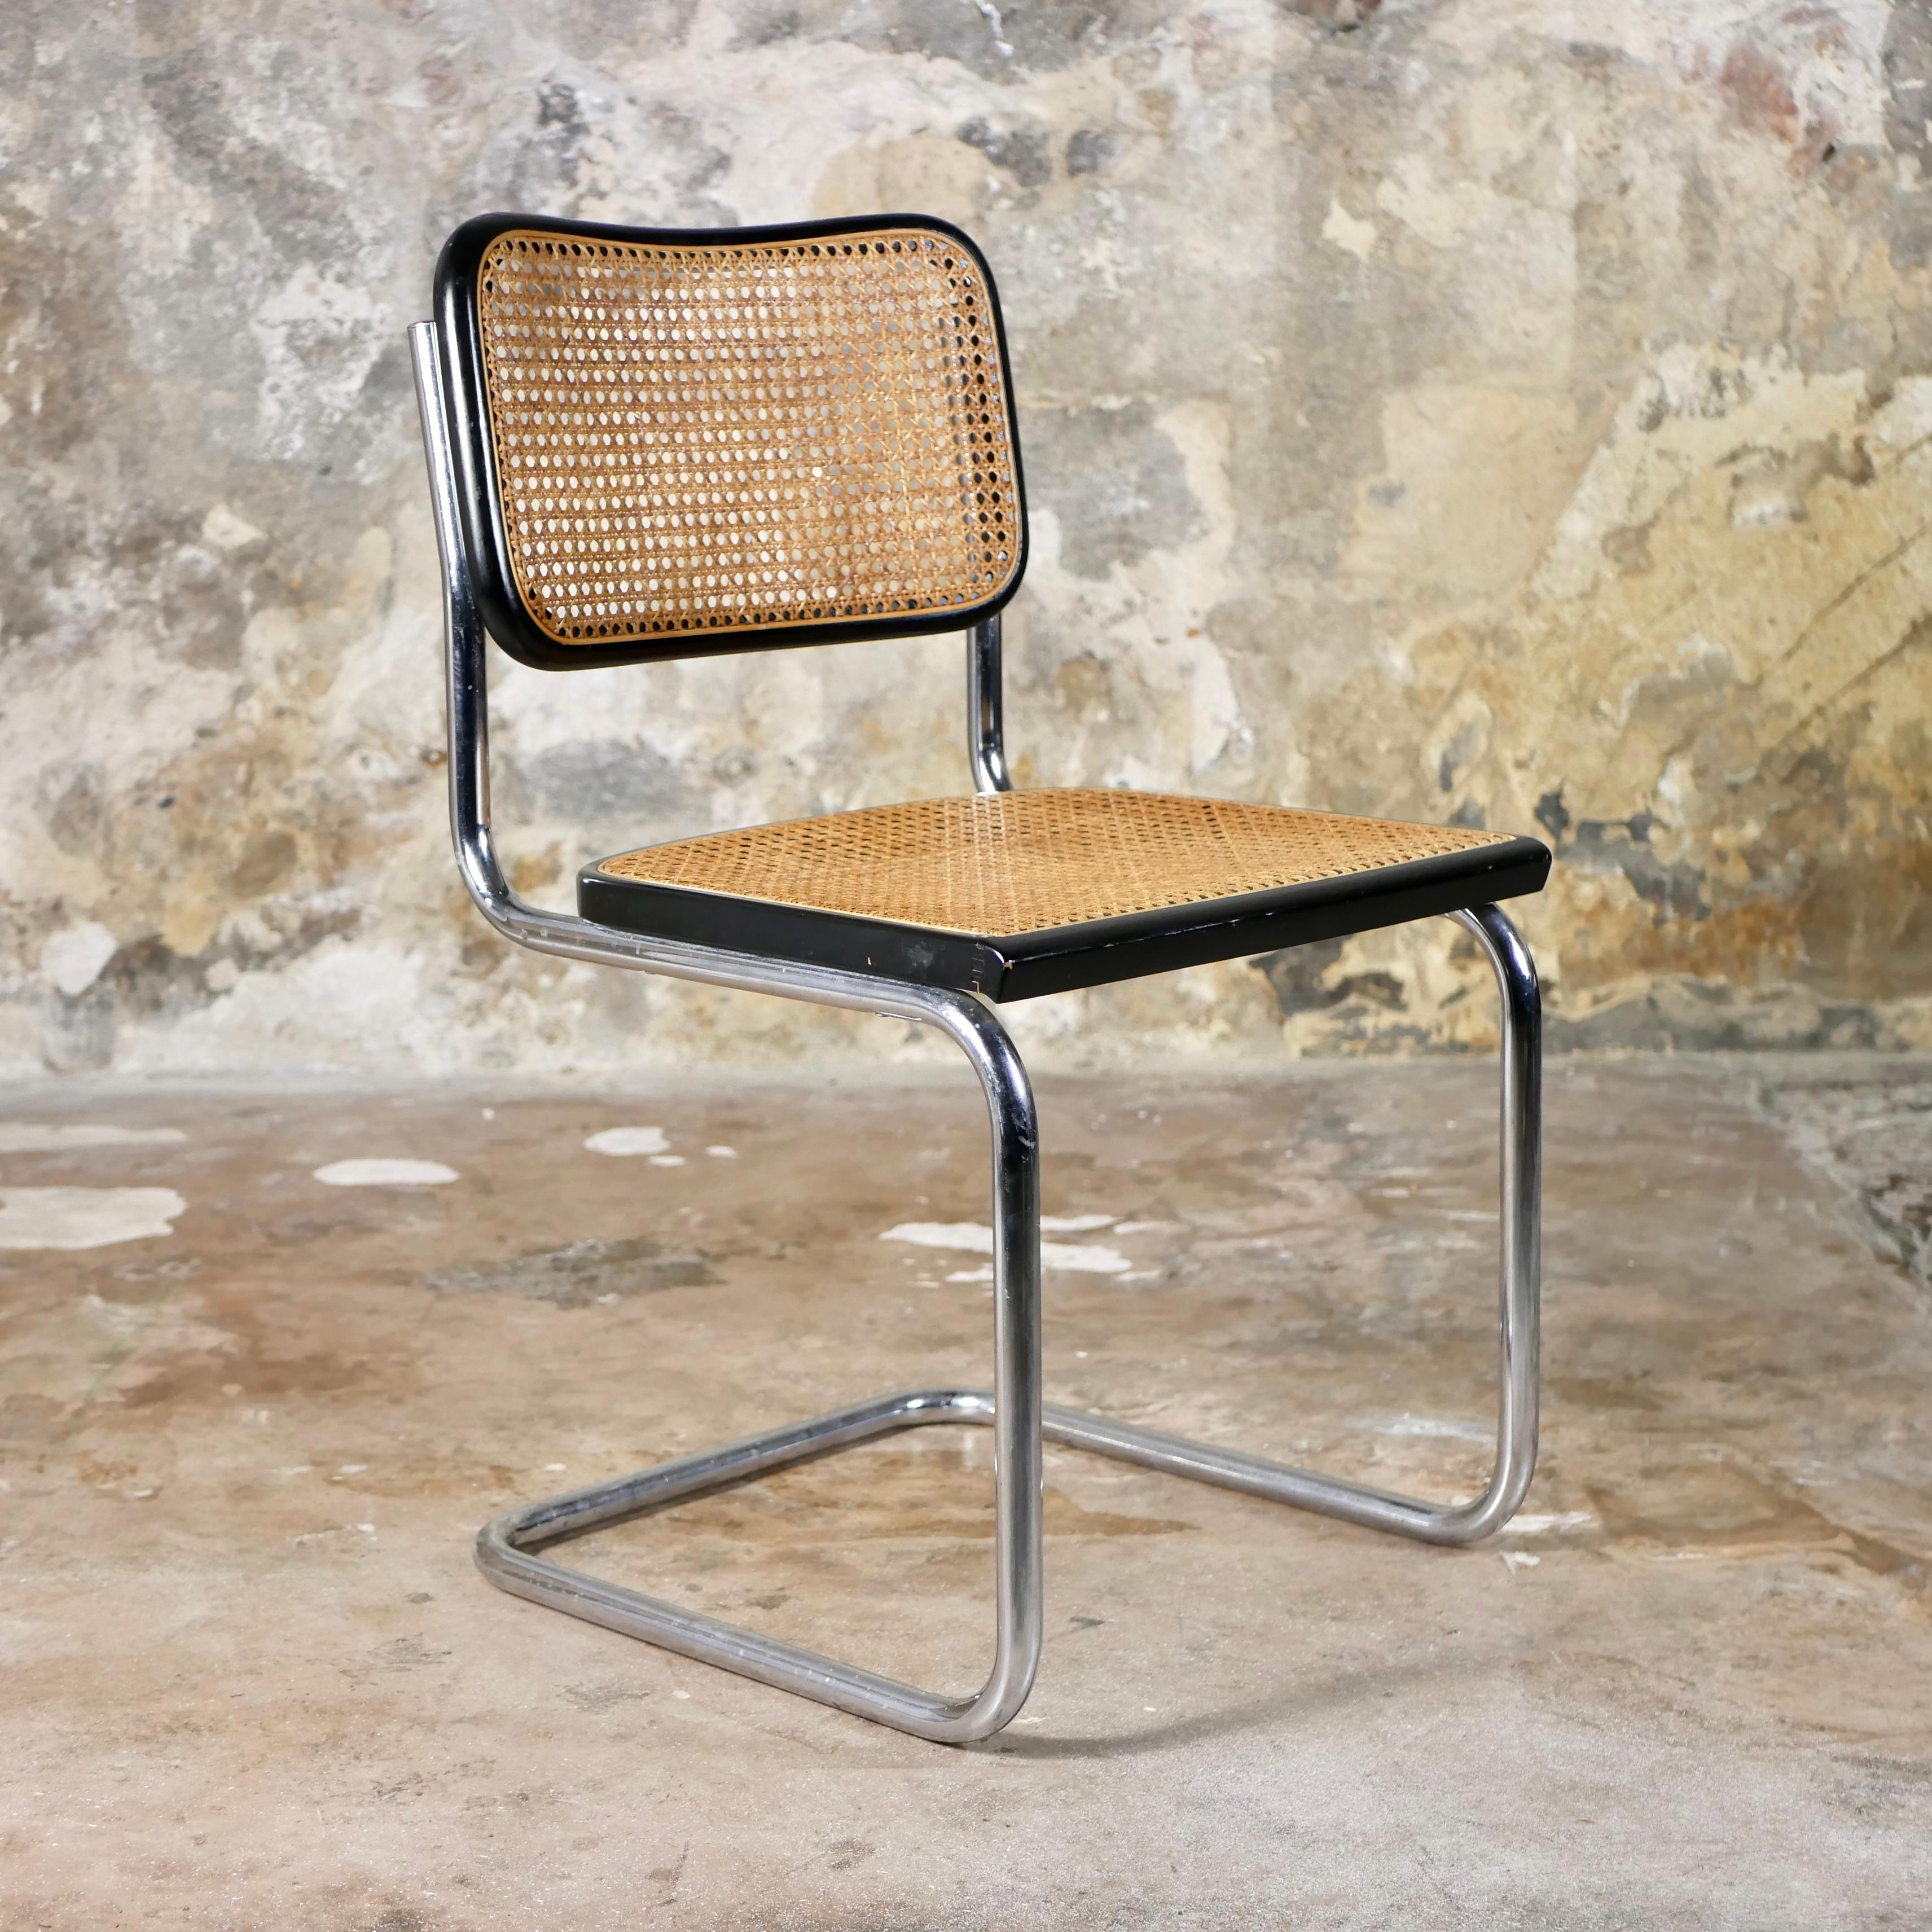 Italian Cesca chair designed by Marcel Breuer, made in Italy, 1970